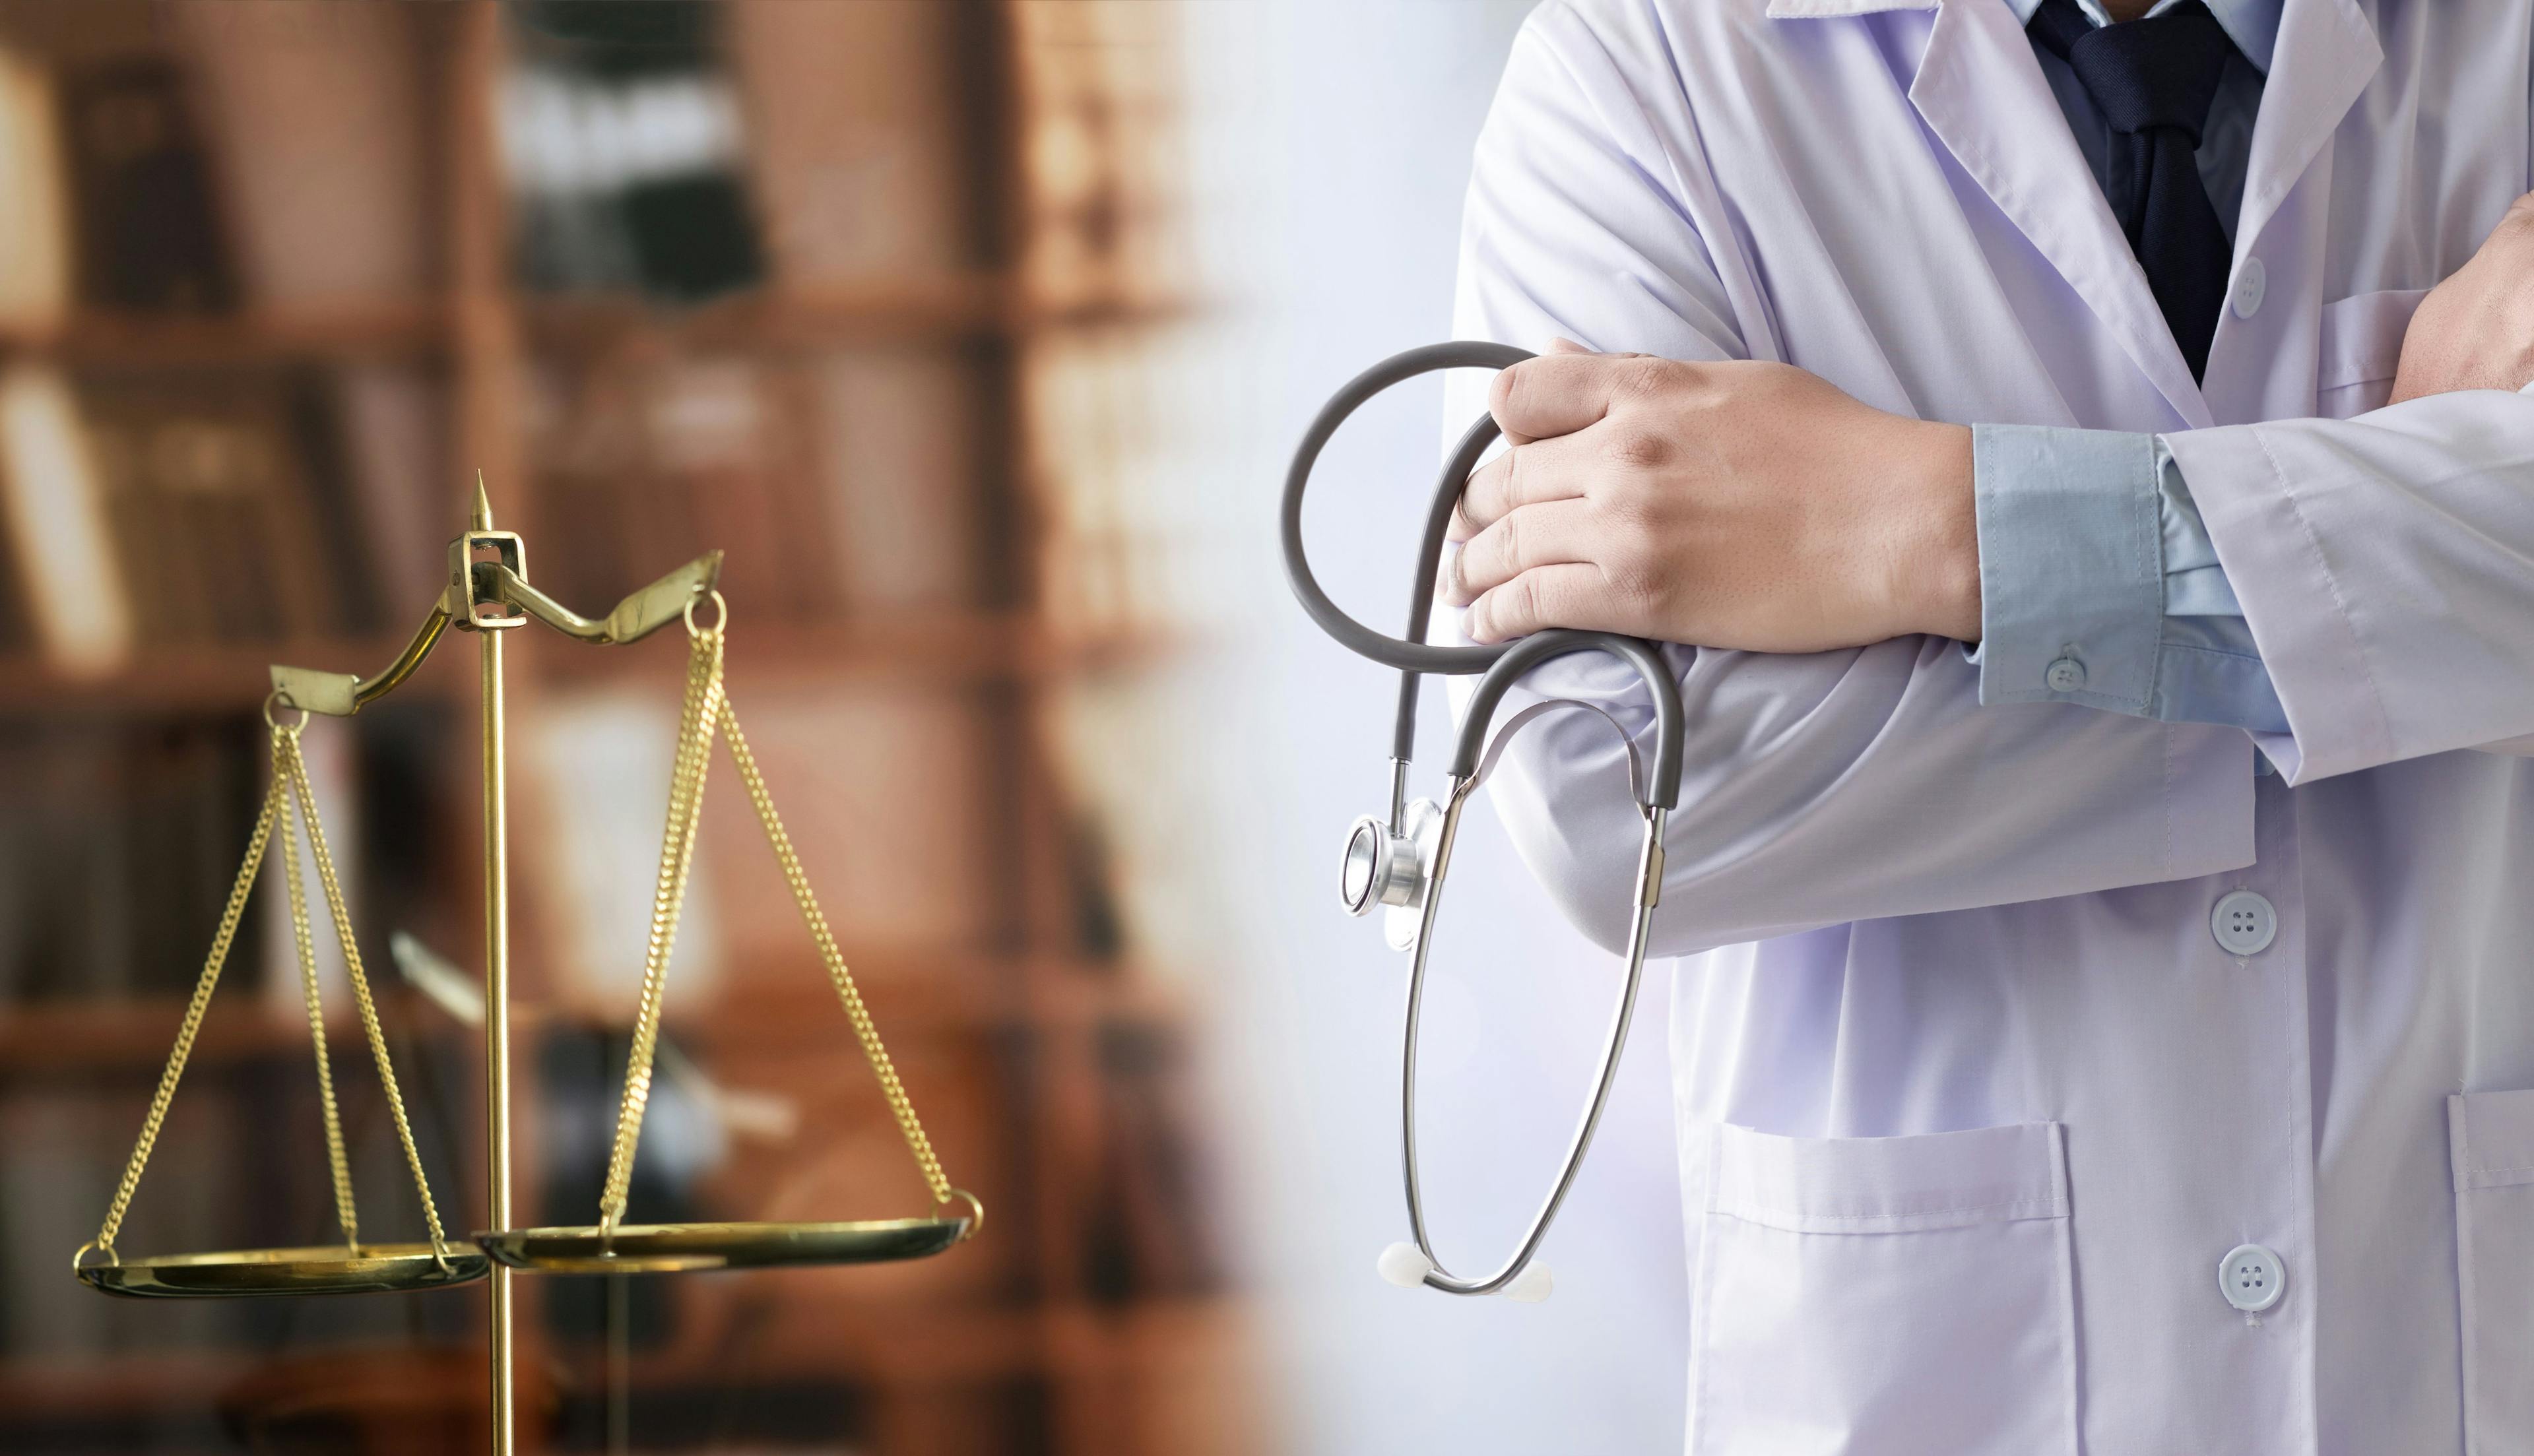 Legal scales and doctor | Image credit: onephoto - stock.adobe.com